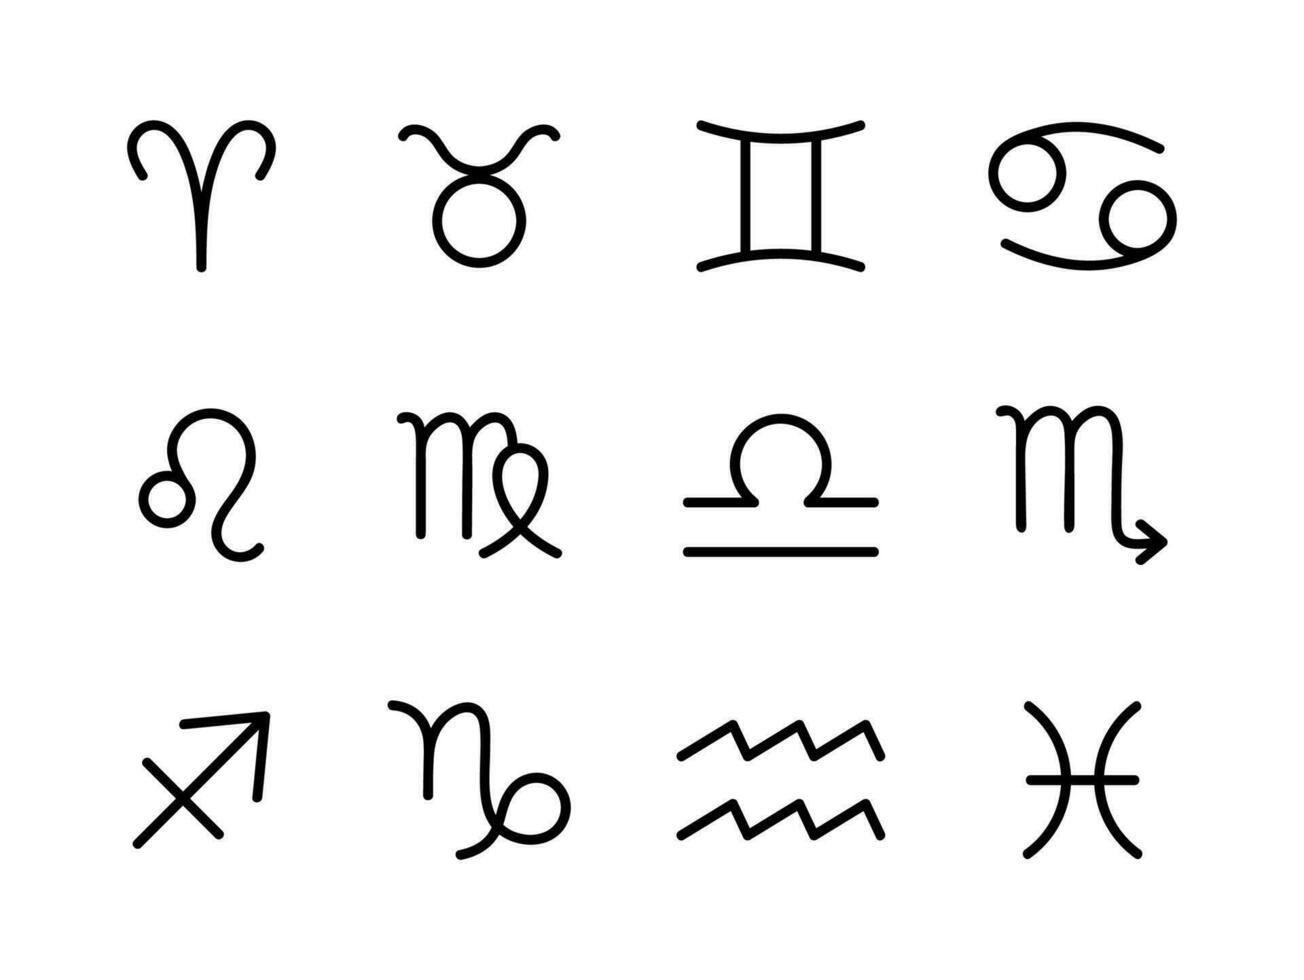 Zodiac signs set. Astrological symbols. Vector Icons.